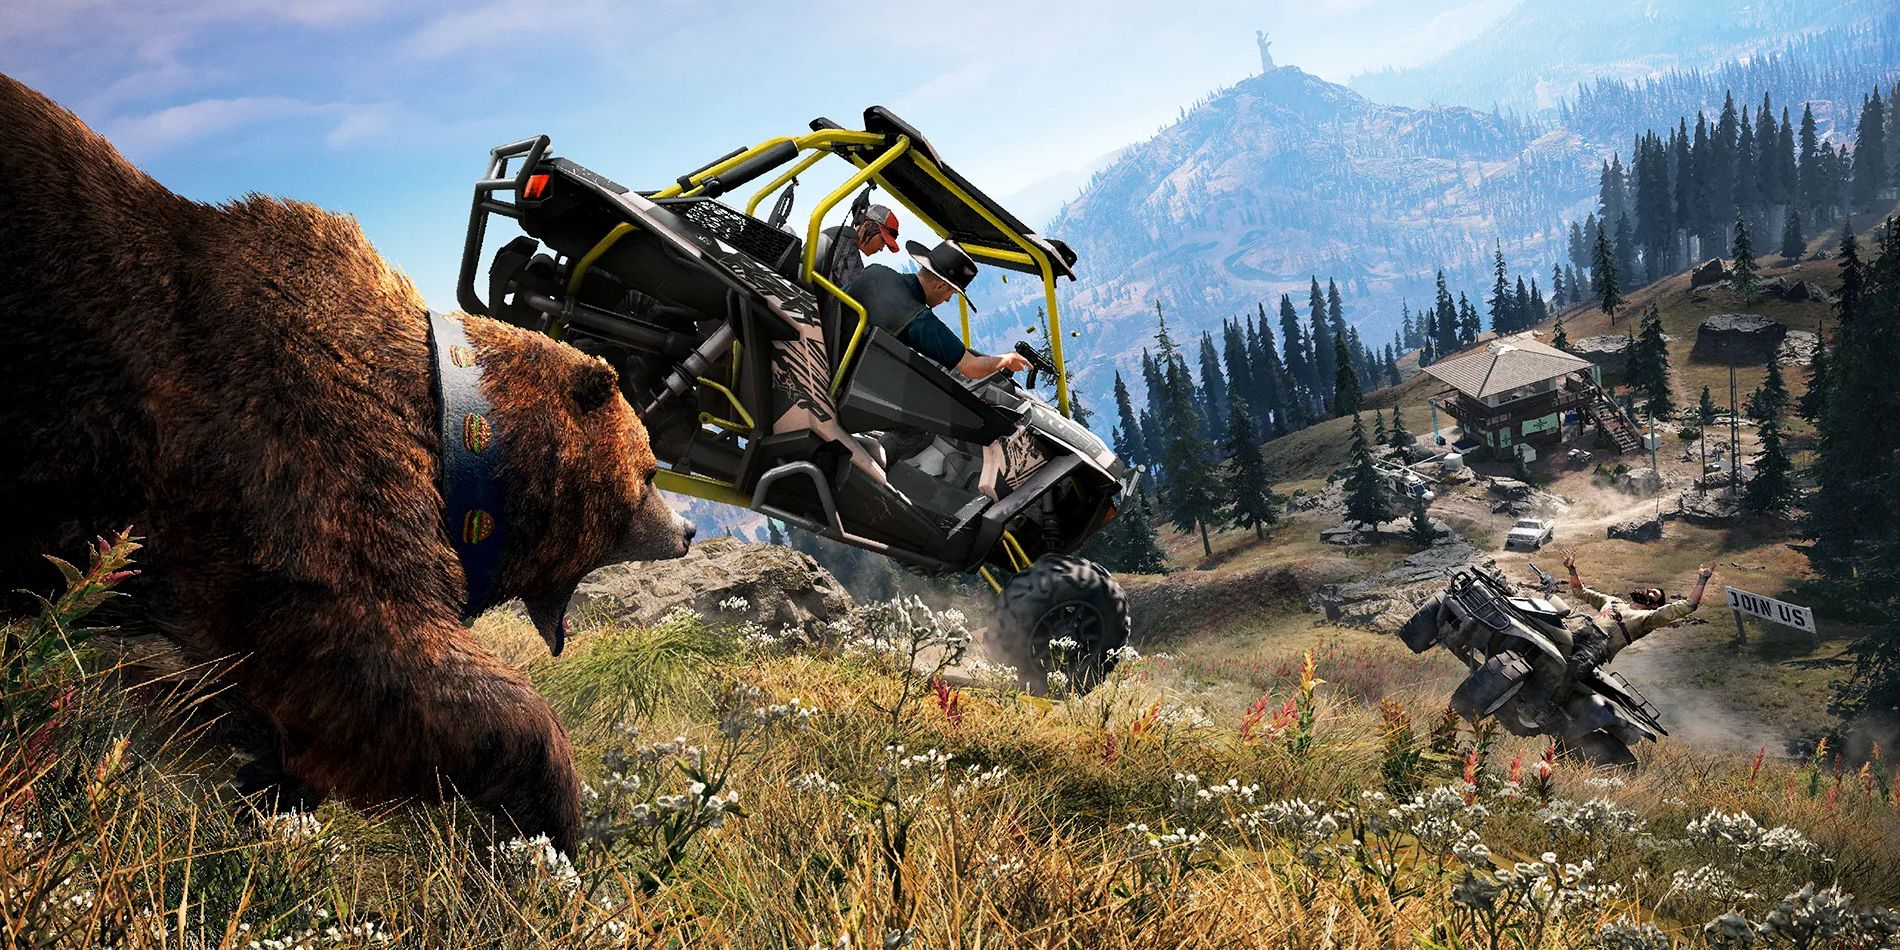 FPS Far Cry 5 Upgraded to 60fps with PS5 Patch